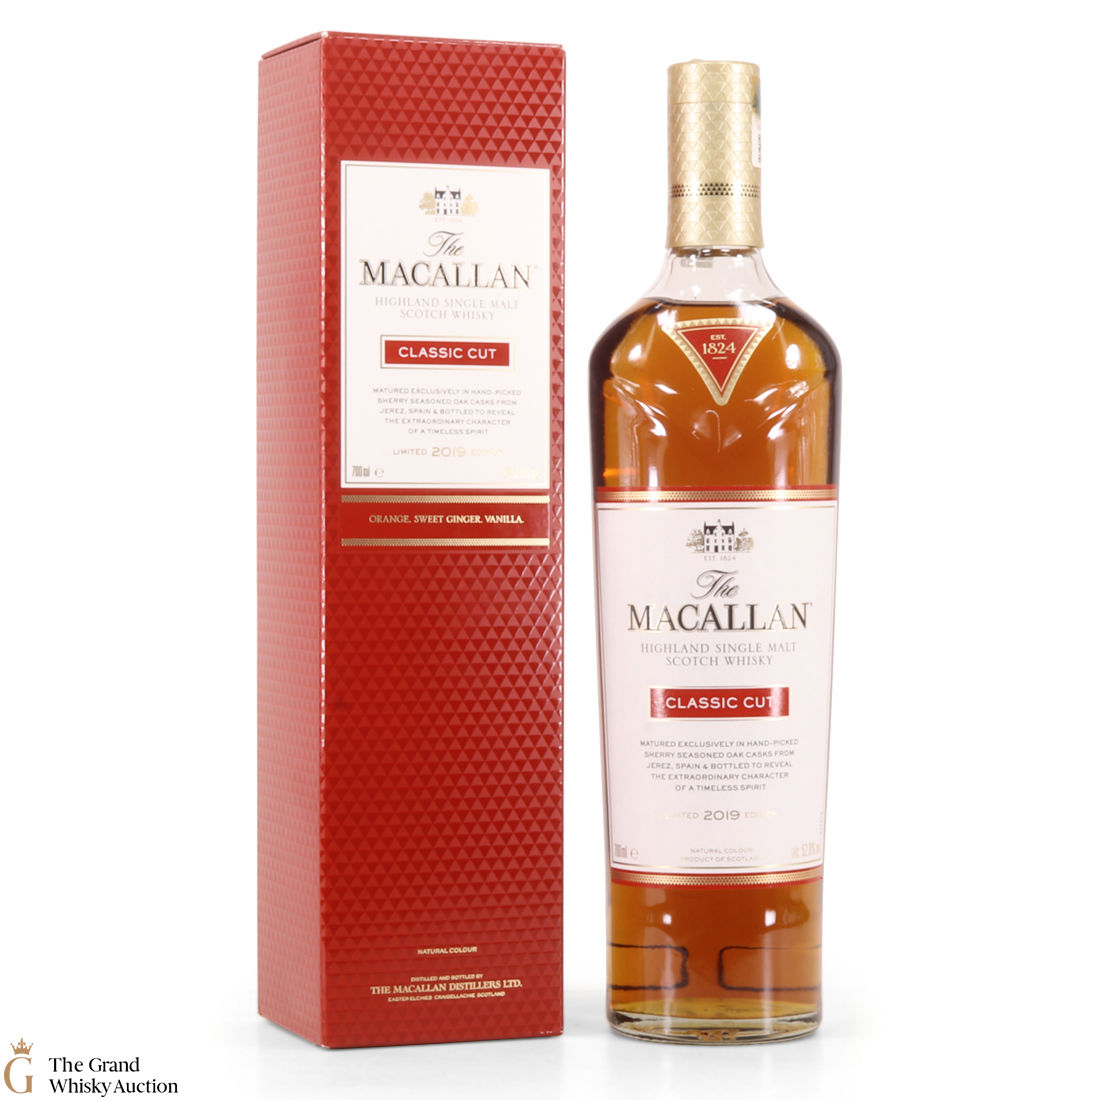 Macallan Classic Cut 2019 Auction The Grand Whisky Auction